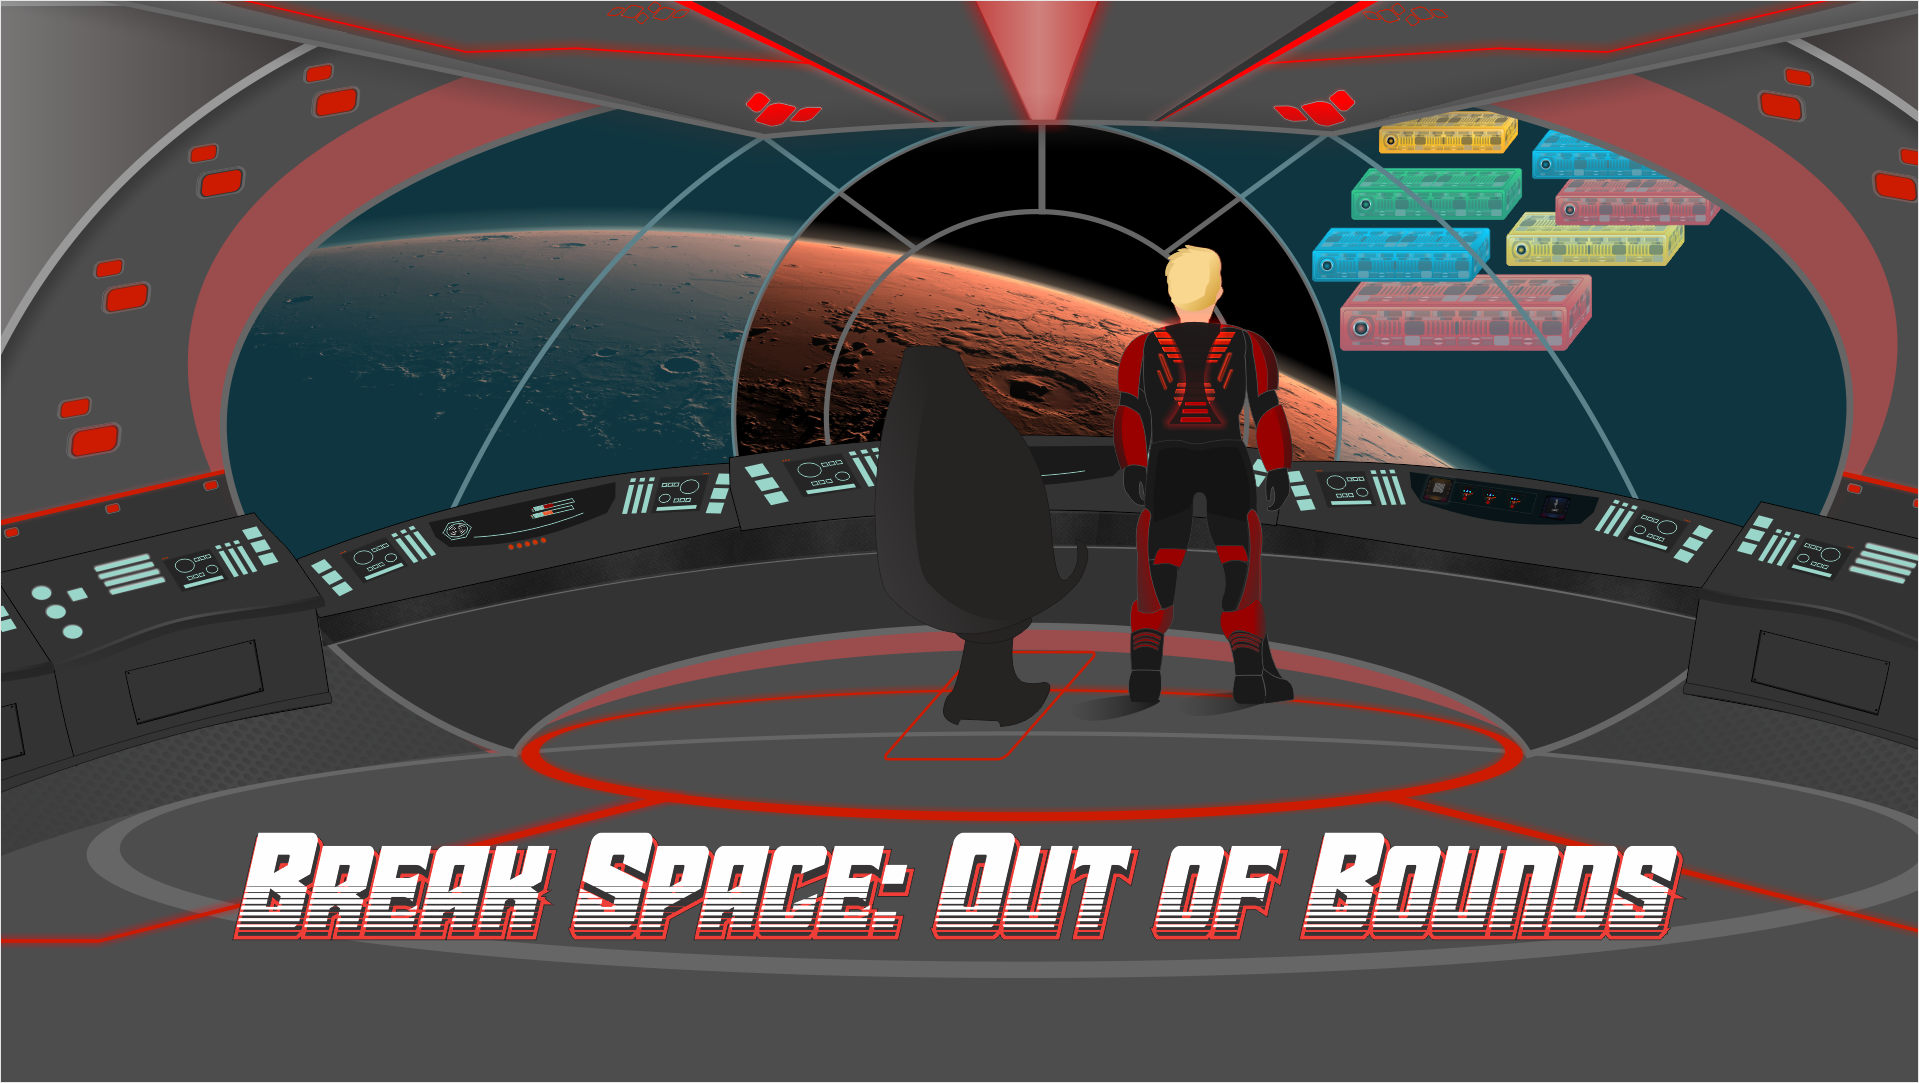 Break Space: Out of Bounds